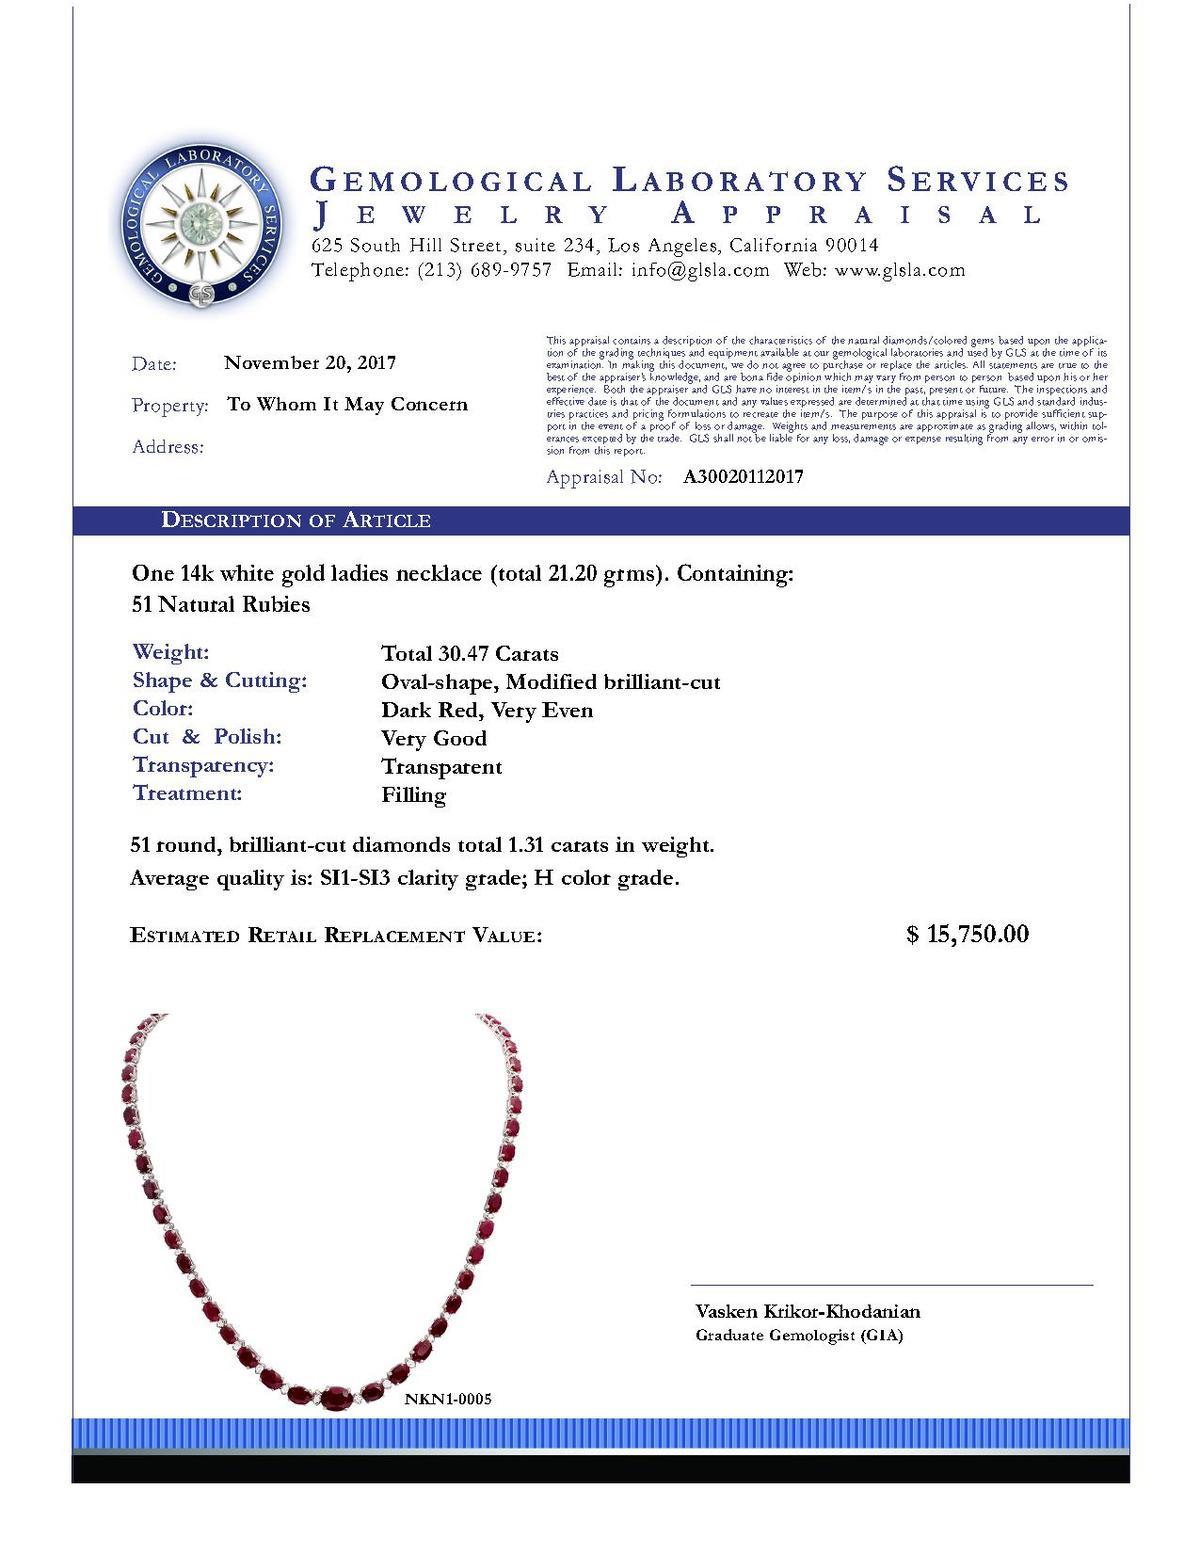 14k White Gold 30.47ct Ruby 1.31ct Diamond Necklace